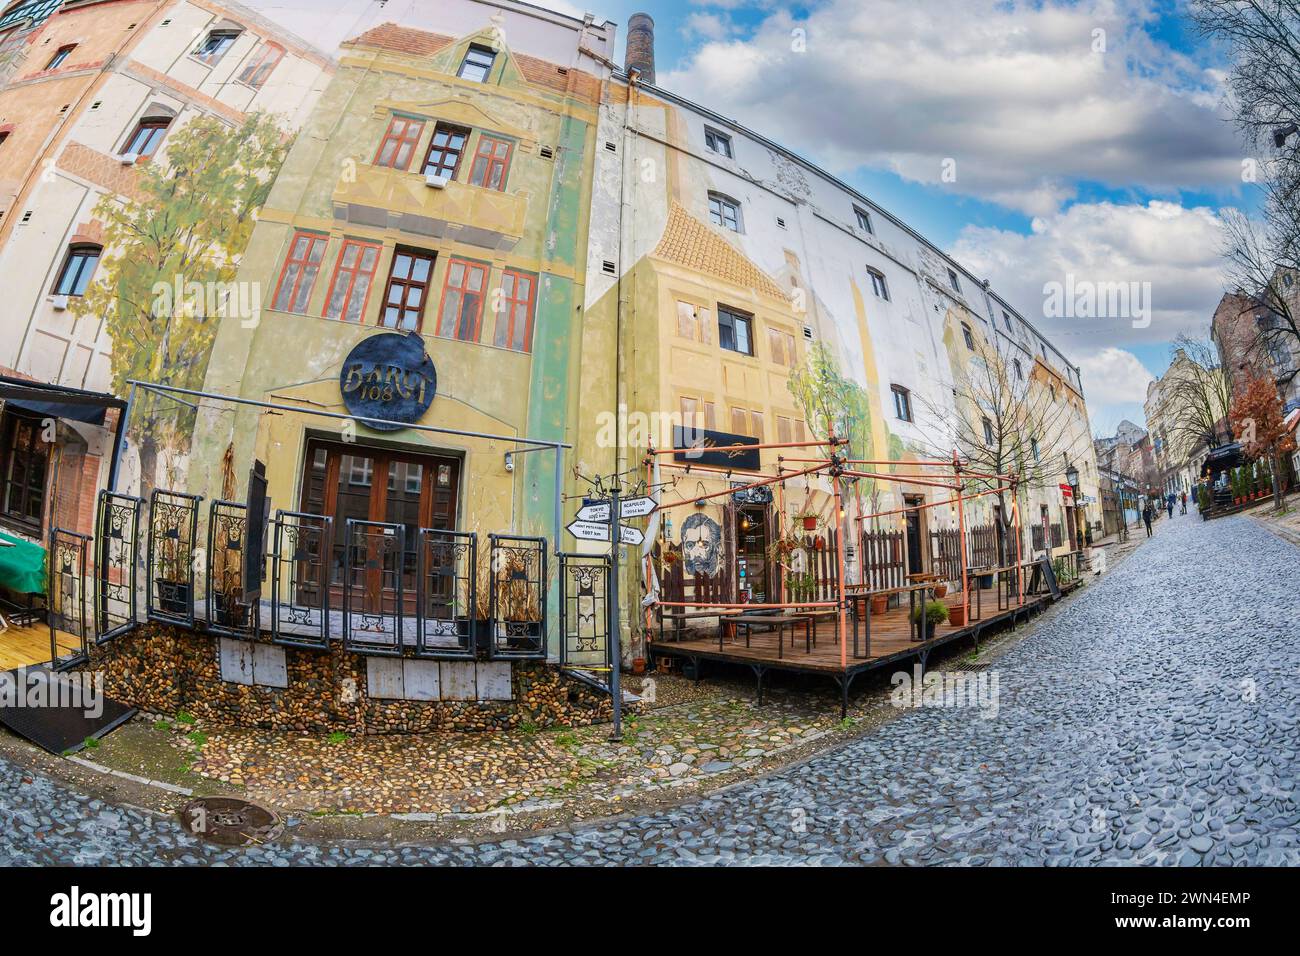 BELGRADE,SERBIA-March 4, 2020: Old painted buildings on the vintage street Skadarlija, the main bohemian place of the city. Stock Photo